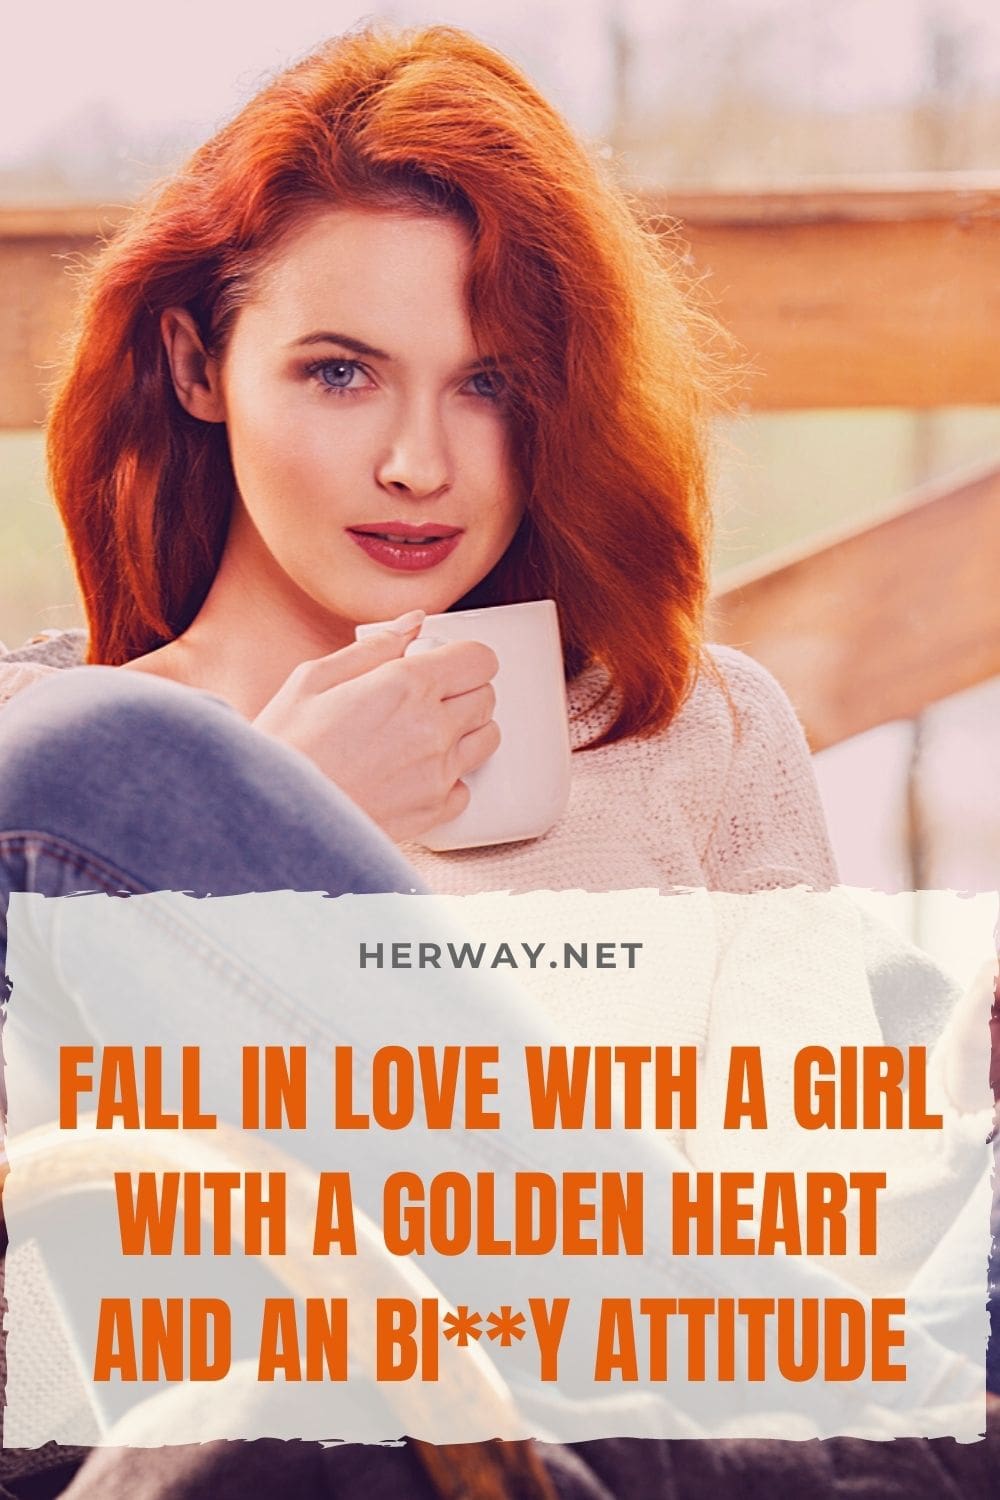 Fall In Love With A Girl With A Golden Heart And An Bi**y Attitude